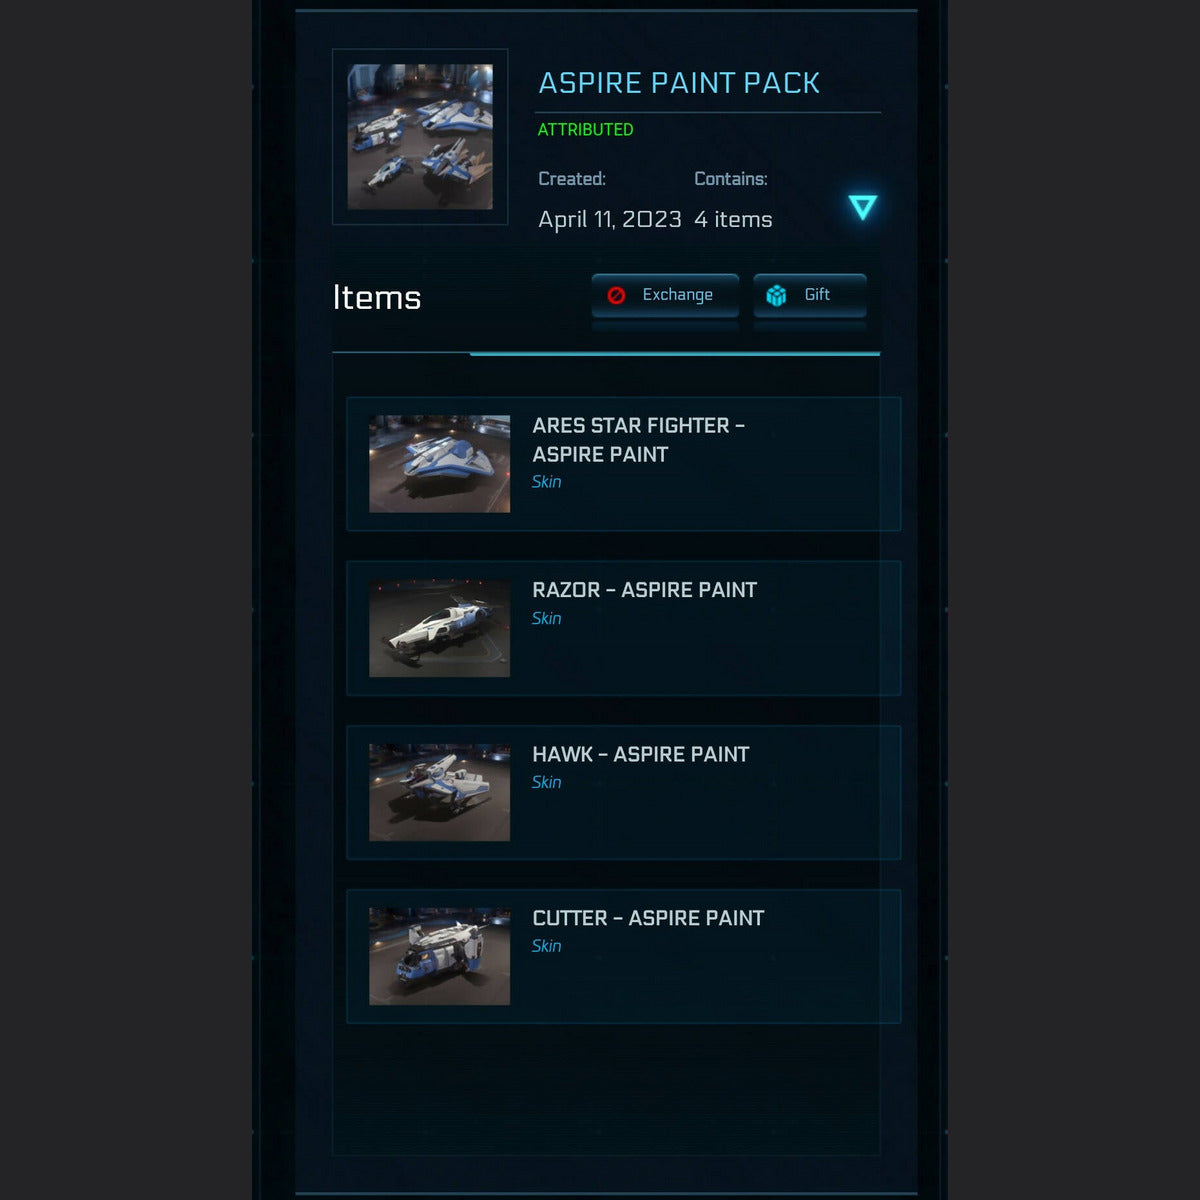 Aspire Paint Pack subscriber exclusive